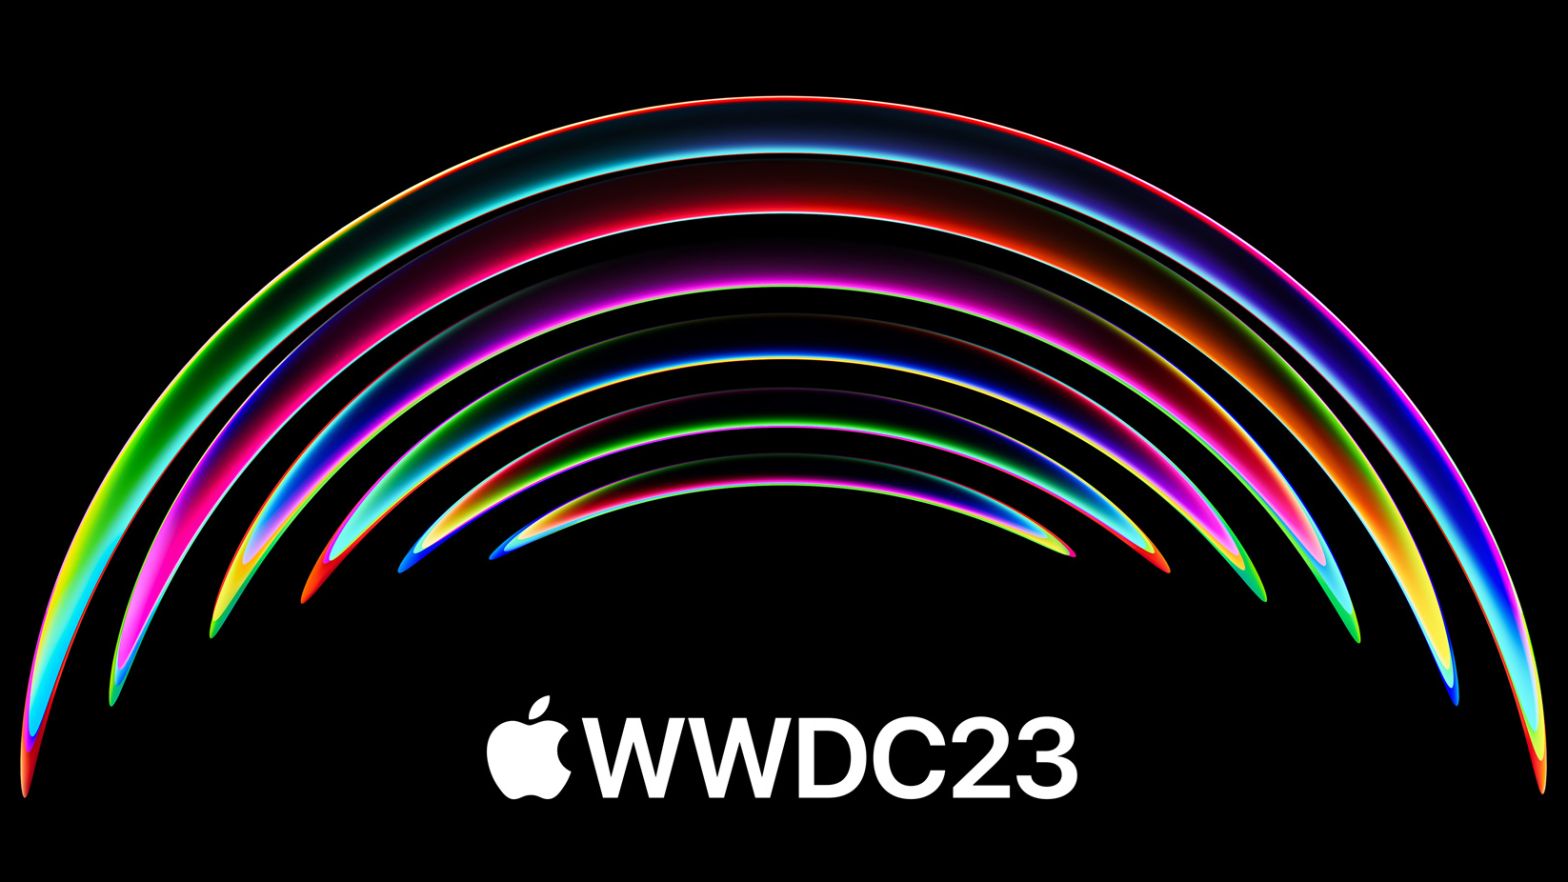 Apple's WWDC 2023 logo for the year has chromatic rainbows. (Image: Apple)